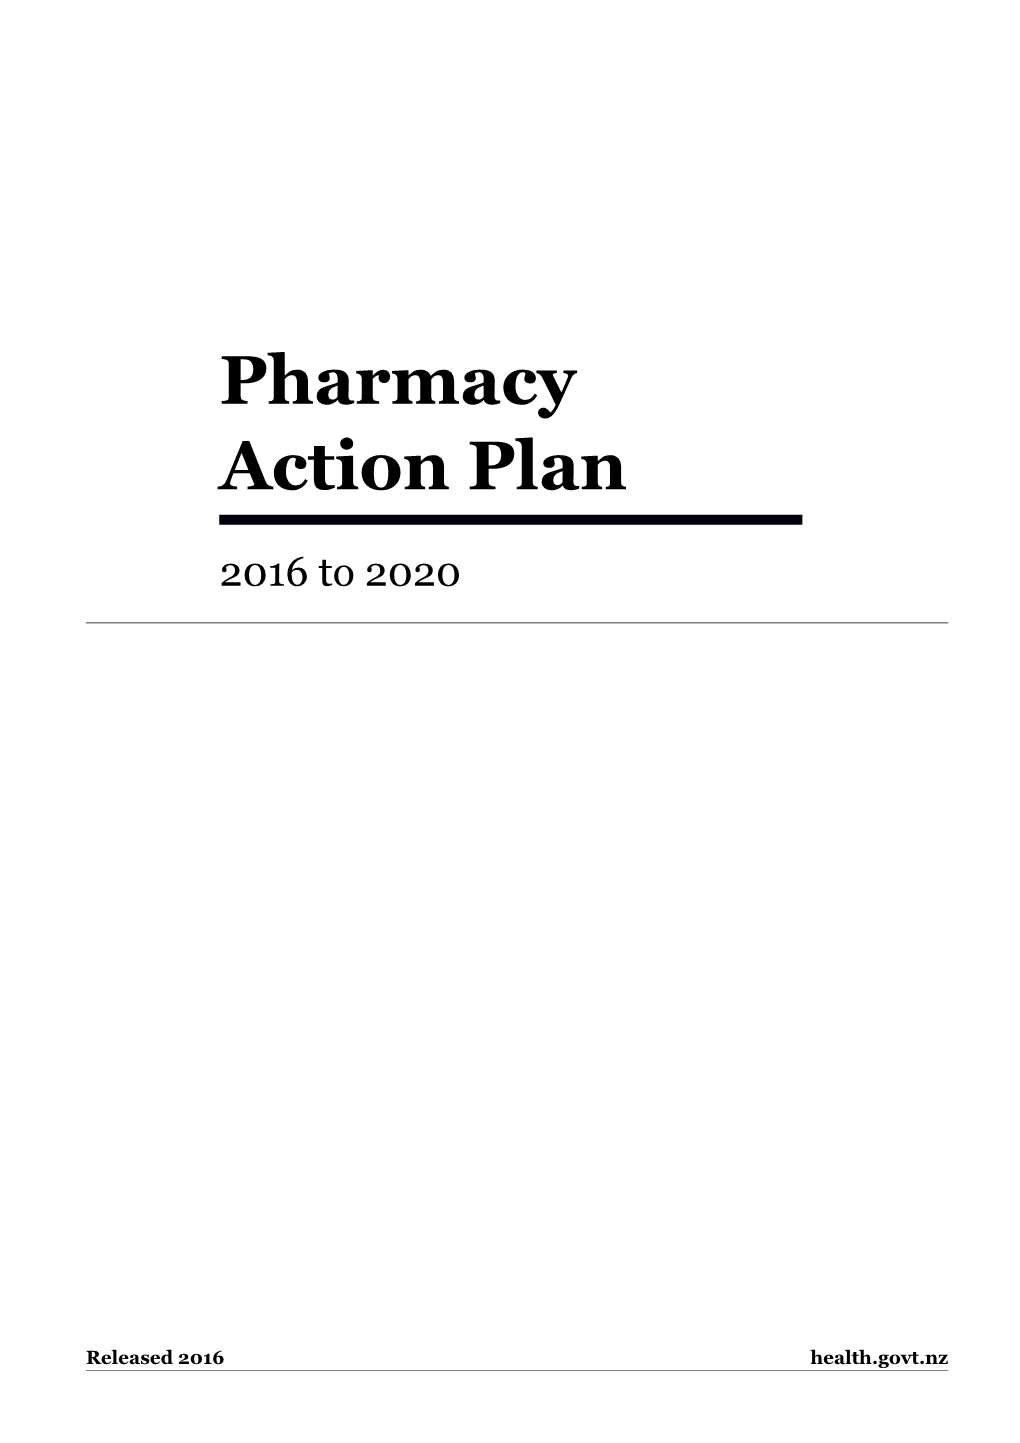 Pharmacy Action Plan 2016 to 2020